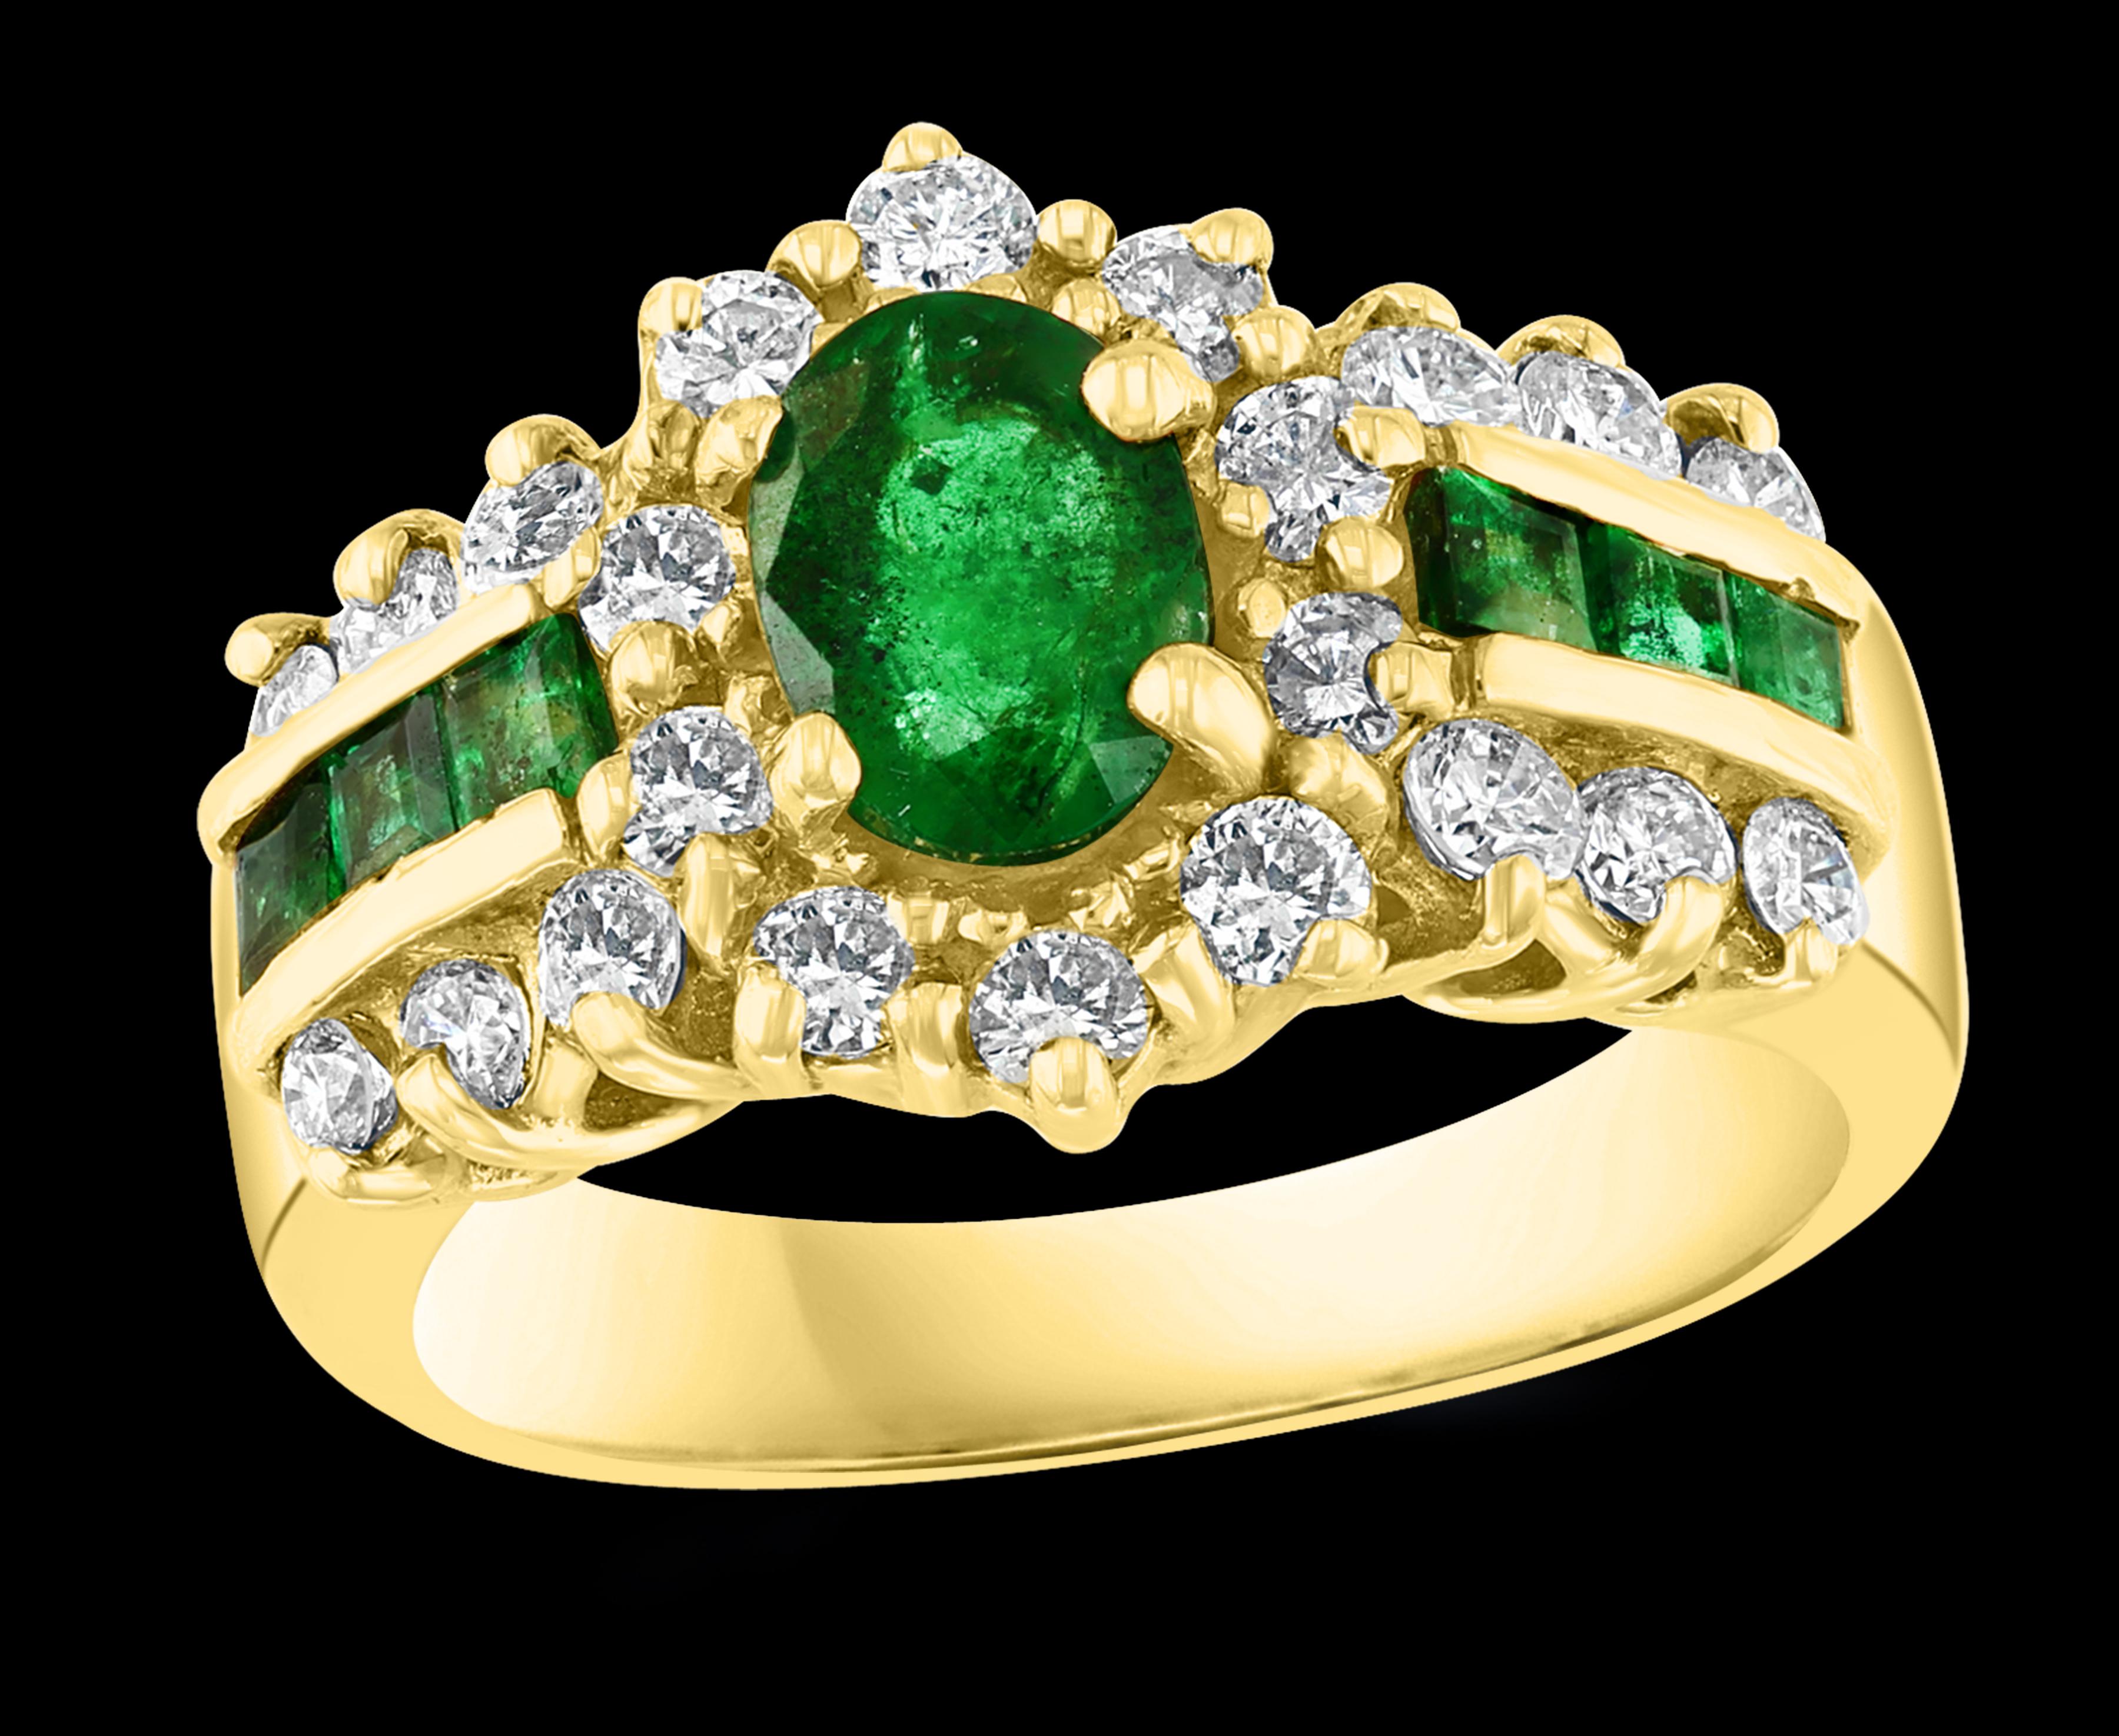 
1.0 Carat Oval Cut  Emerald & 1.0 Carat Diamond Ring 18 K Yellow Gold Size 6.5
Oval Emerald Ring
 Emeralds are very precious , Very Difficult to find and getting more more difficult to find.
A classic, Cocktail ring 

18k Gold 7.2gram
 Diamonds: